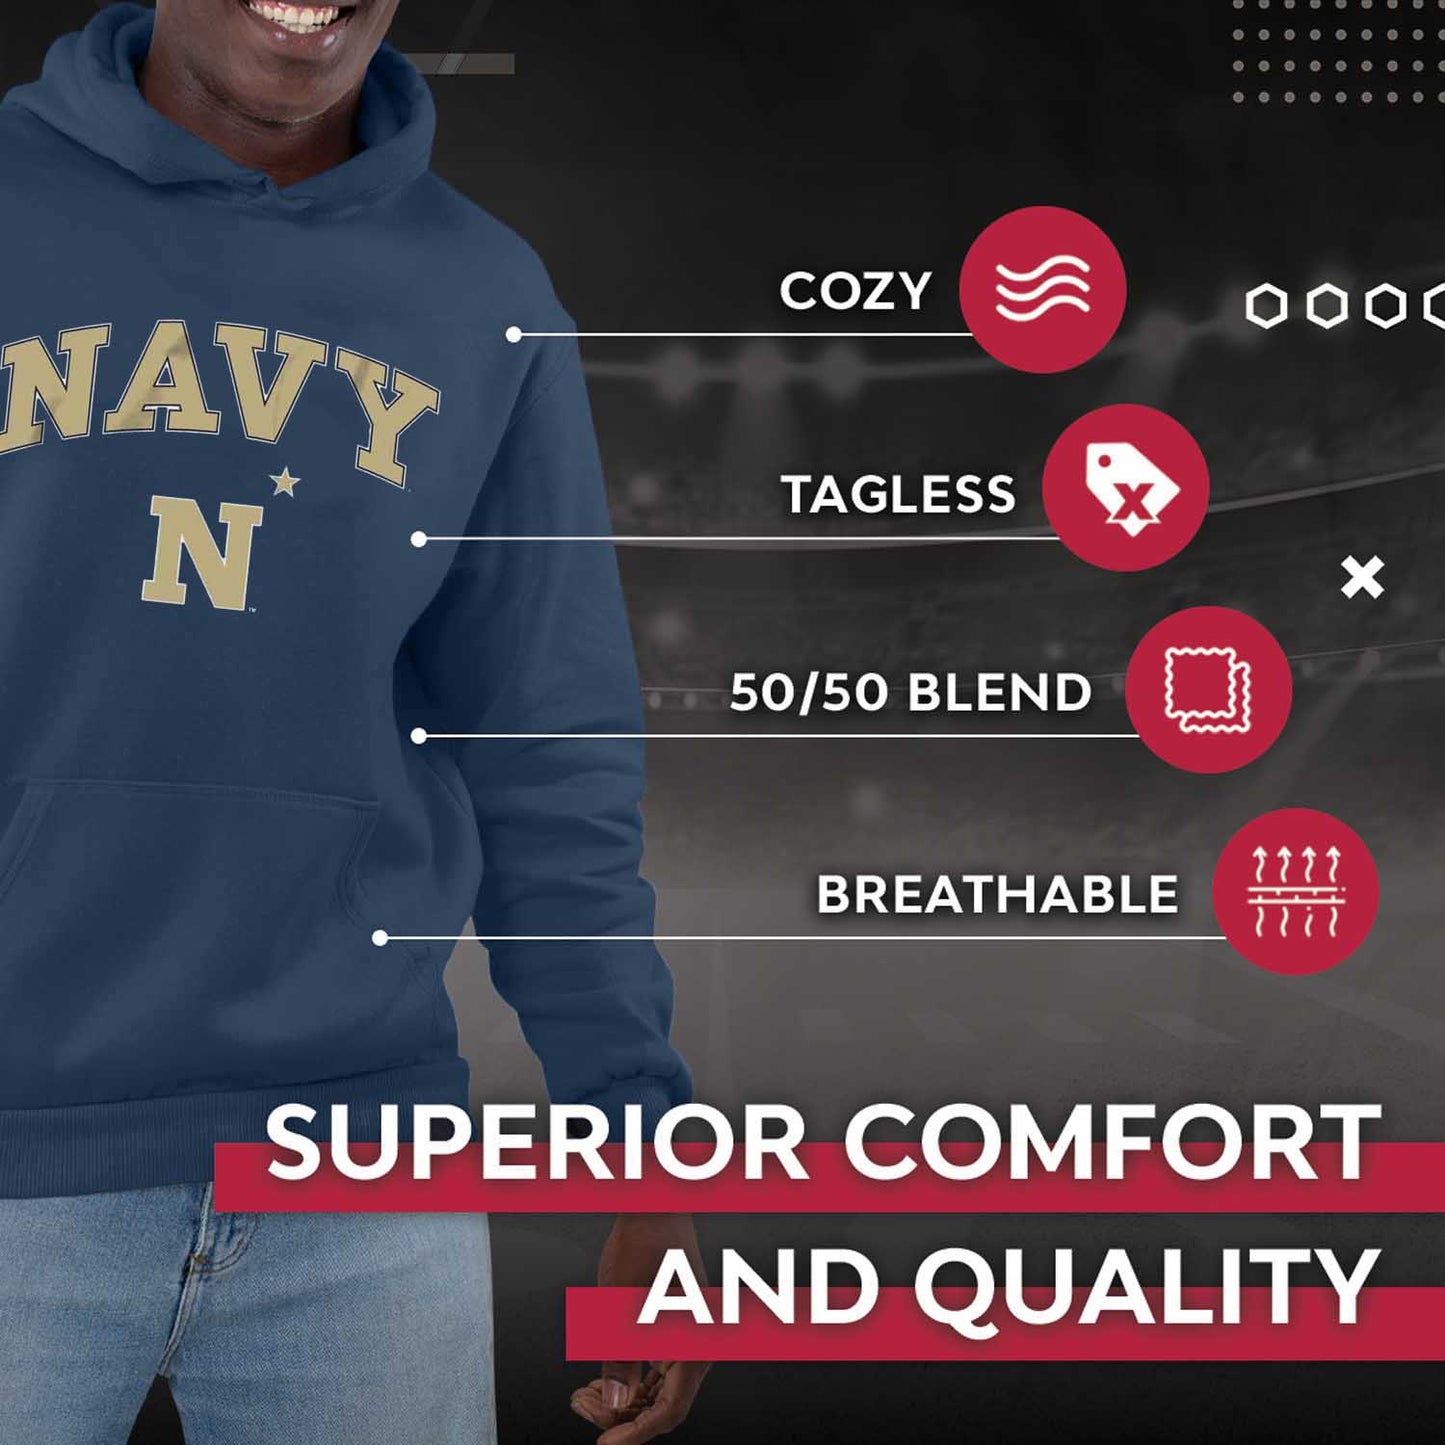 Navy Midshipmen Campus Colors Adult Arch & Logo Soft Style Gameday Hooded Sweatshirt  - Navy